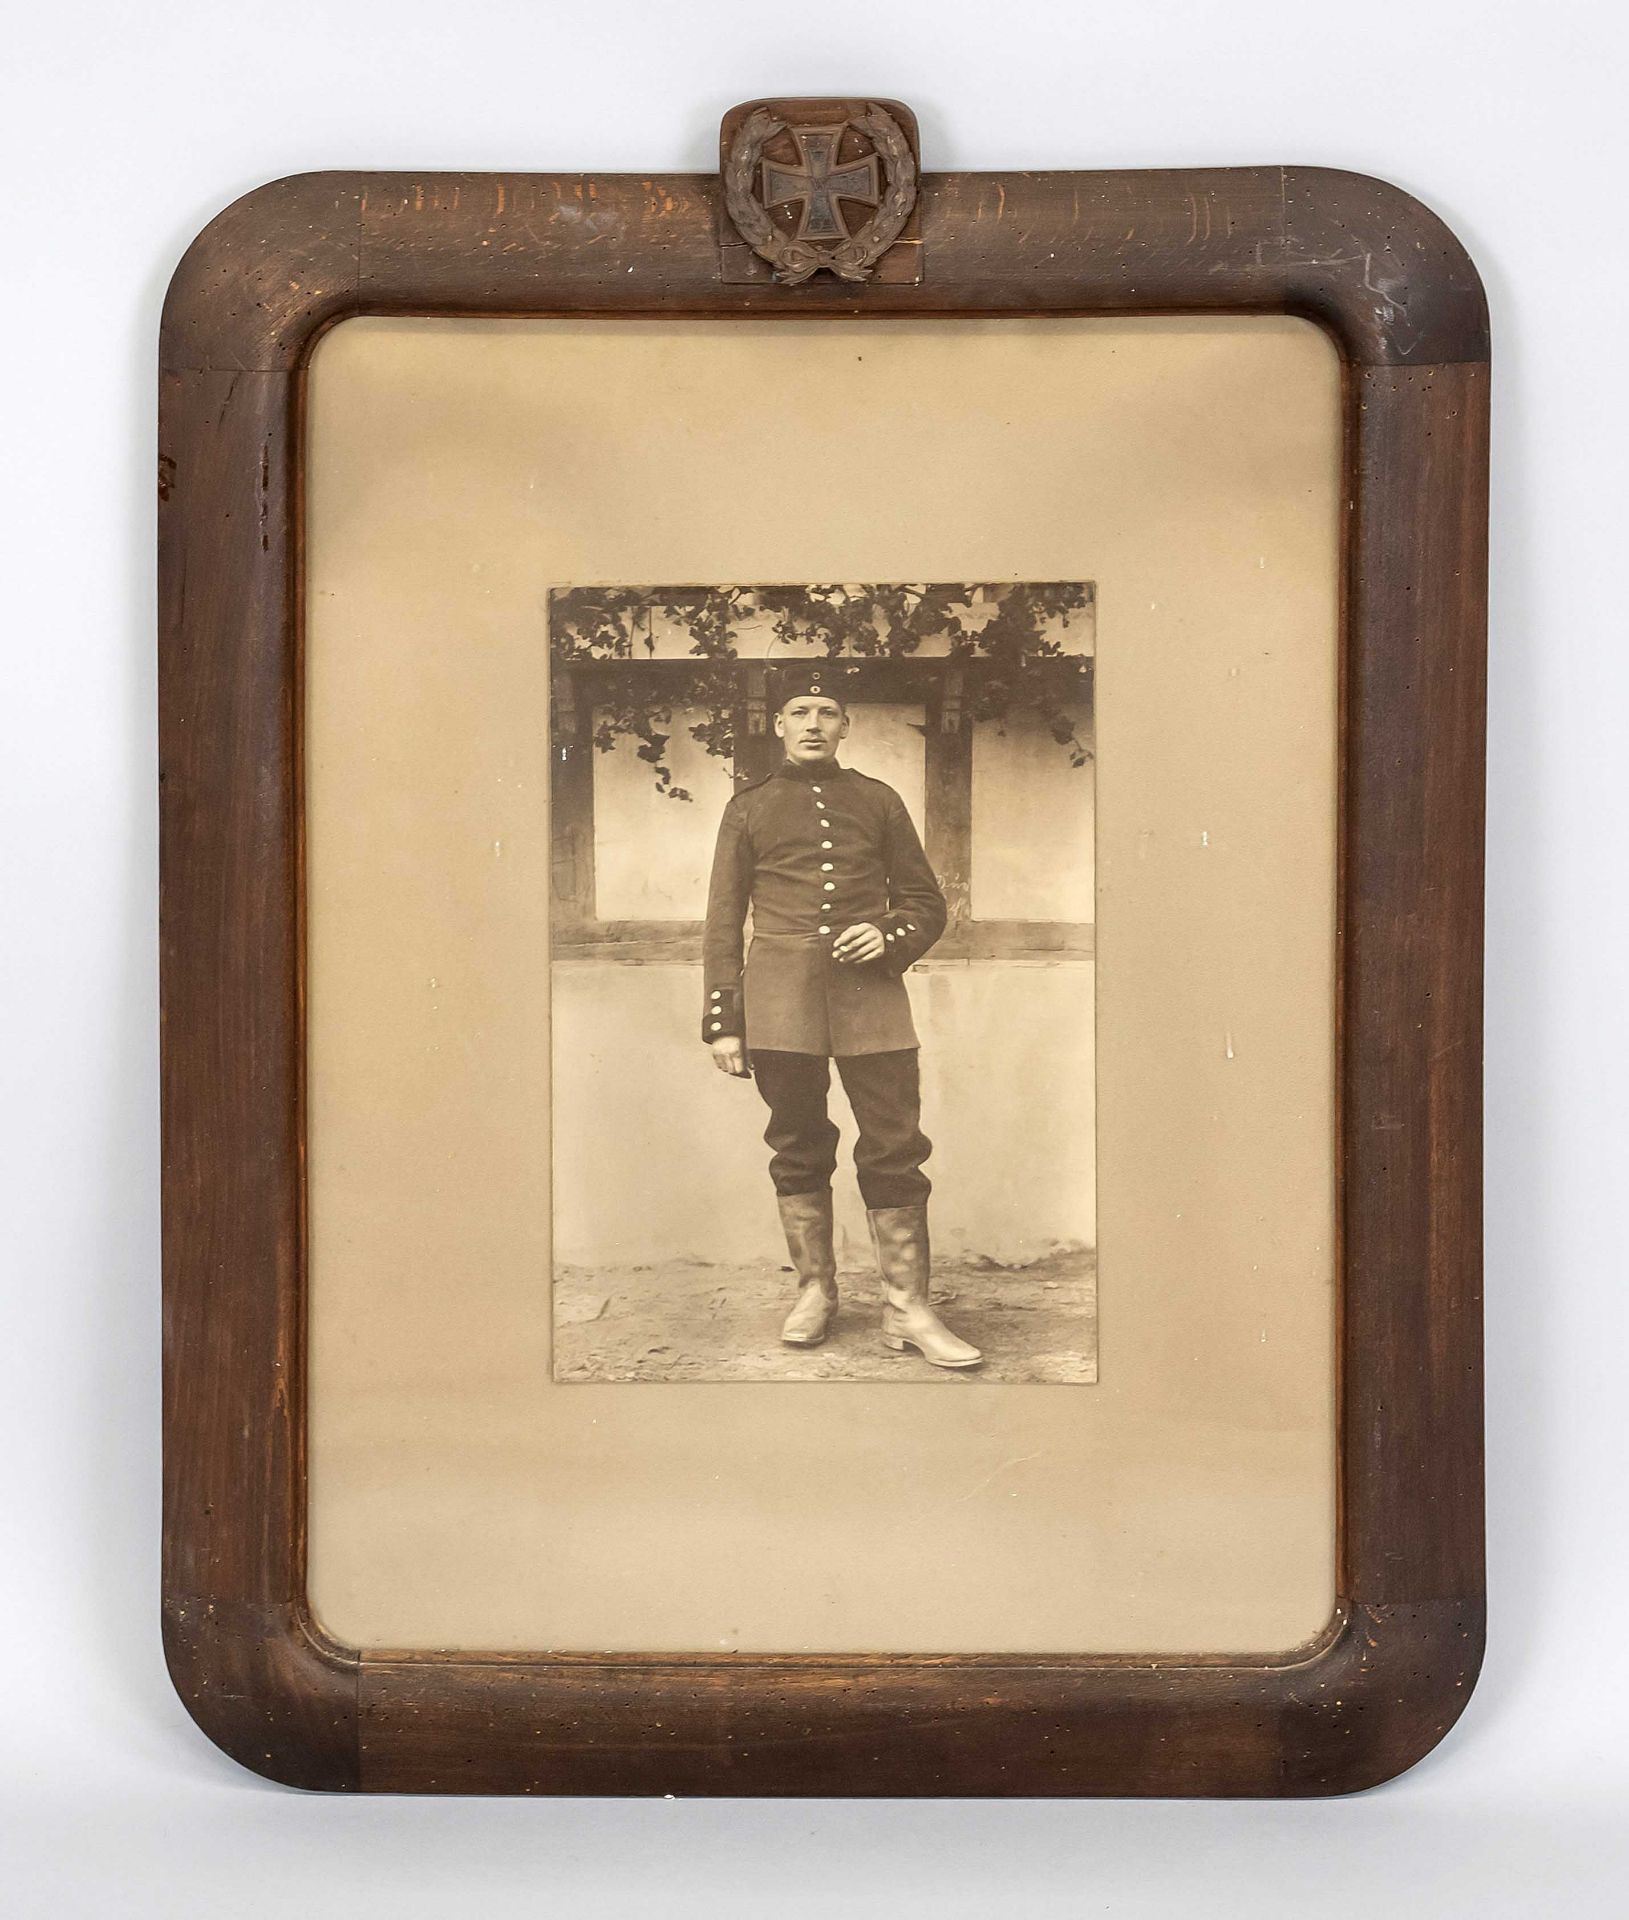 Framed photograph of a soldier/reservist, Germany, WW1. Black & white photograph behind glass in